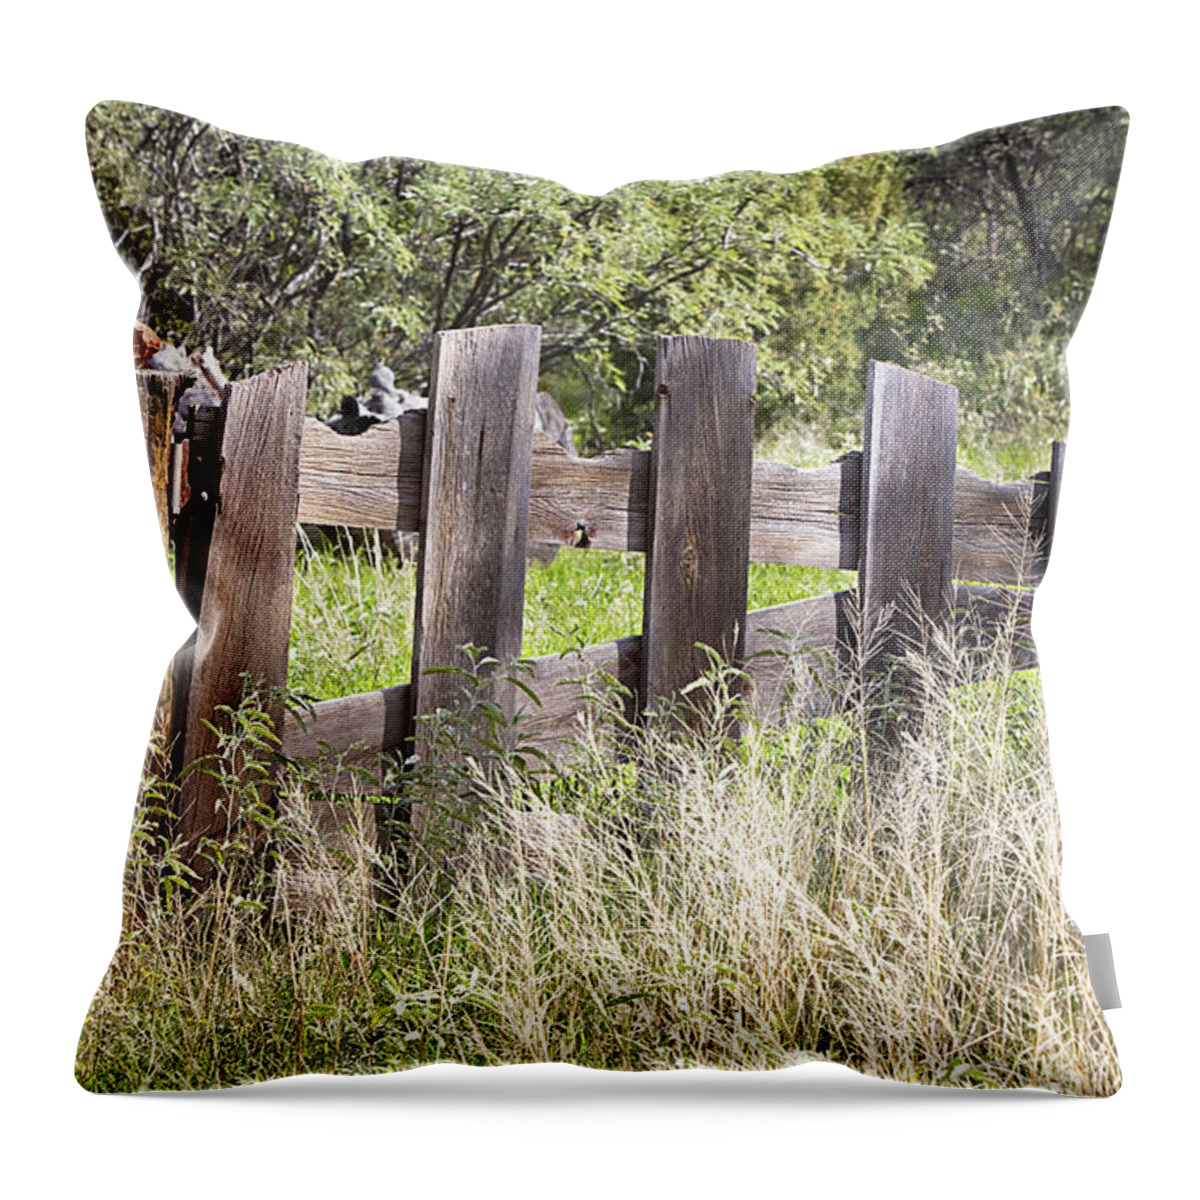 Fence Throw Pillow featuring the photograph Who Ate The Fence by Phyllis Denton